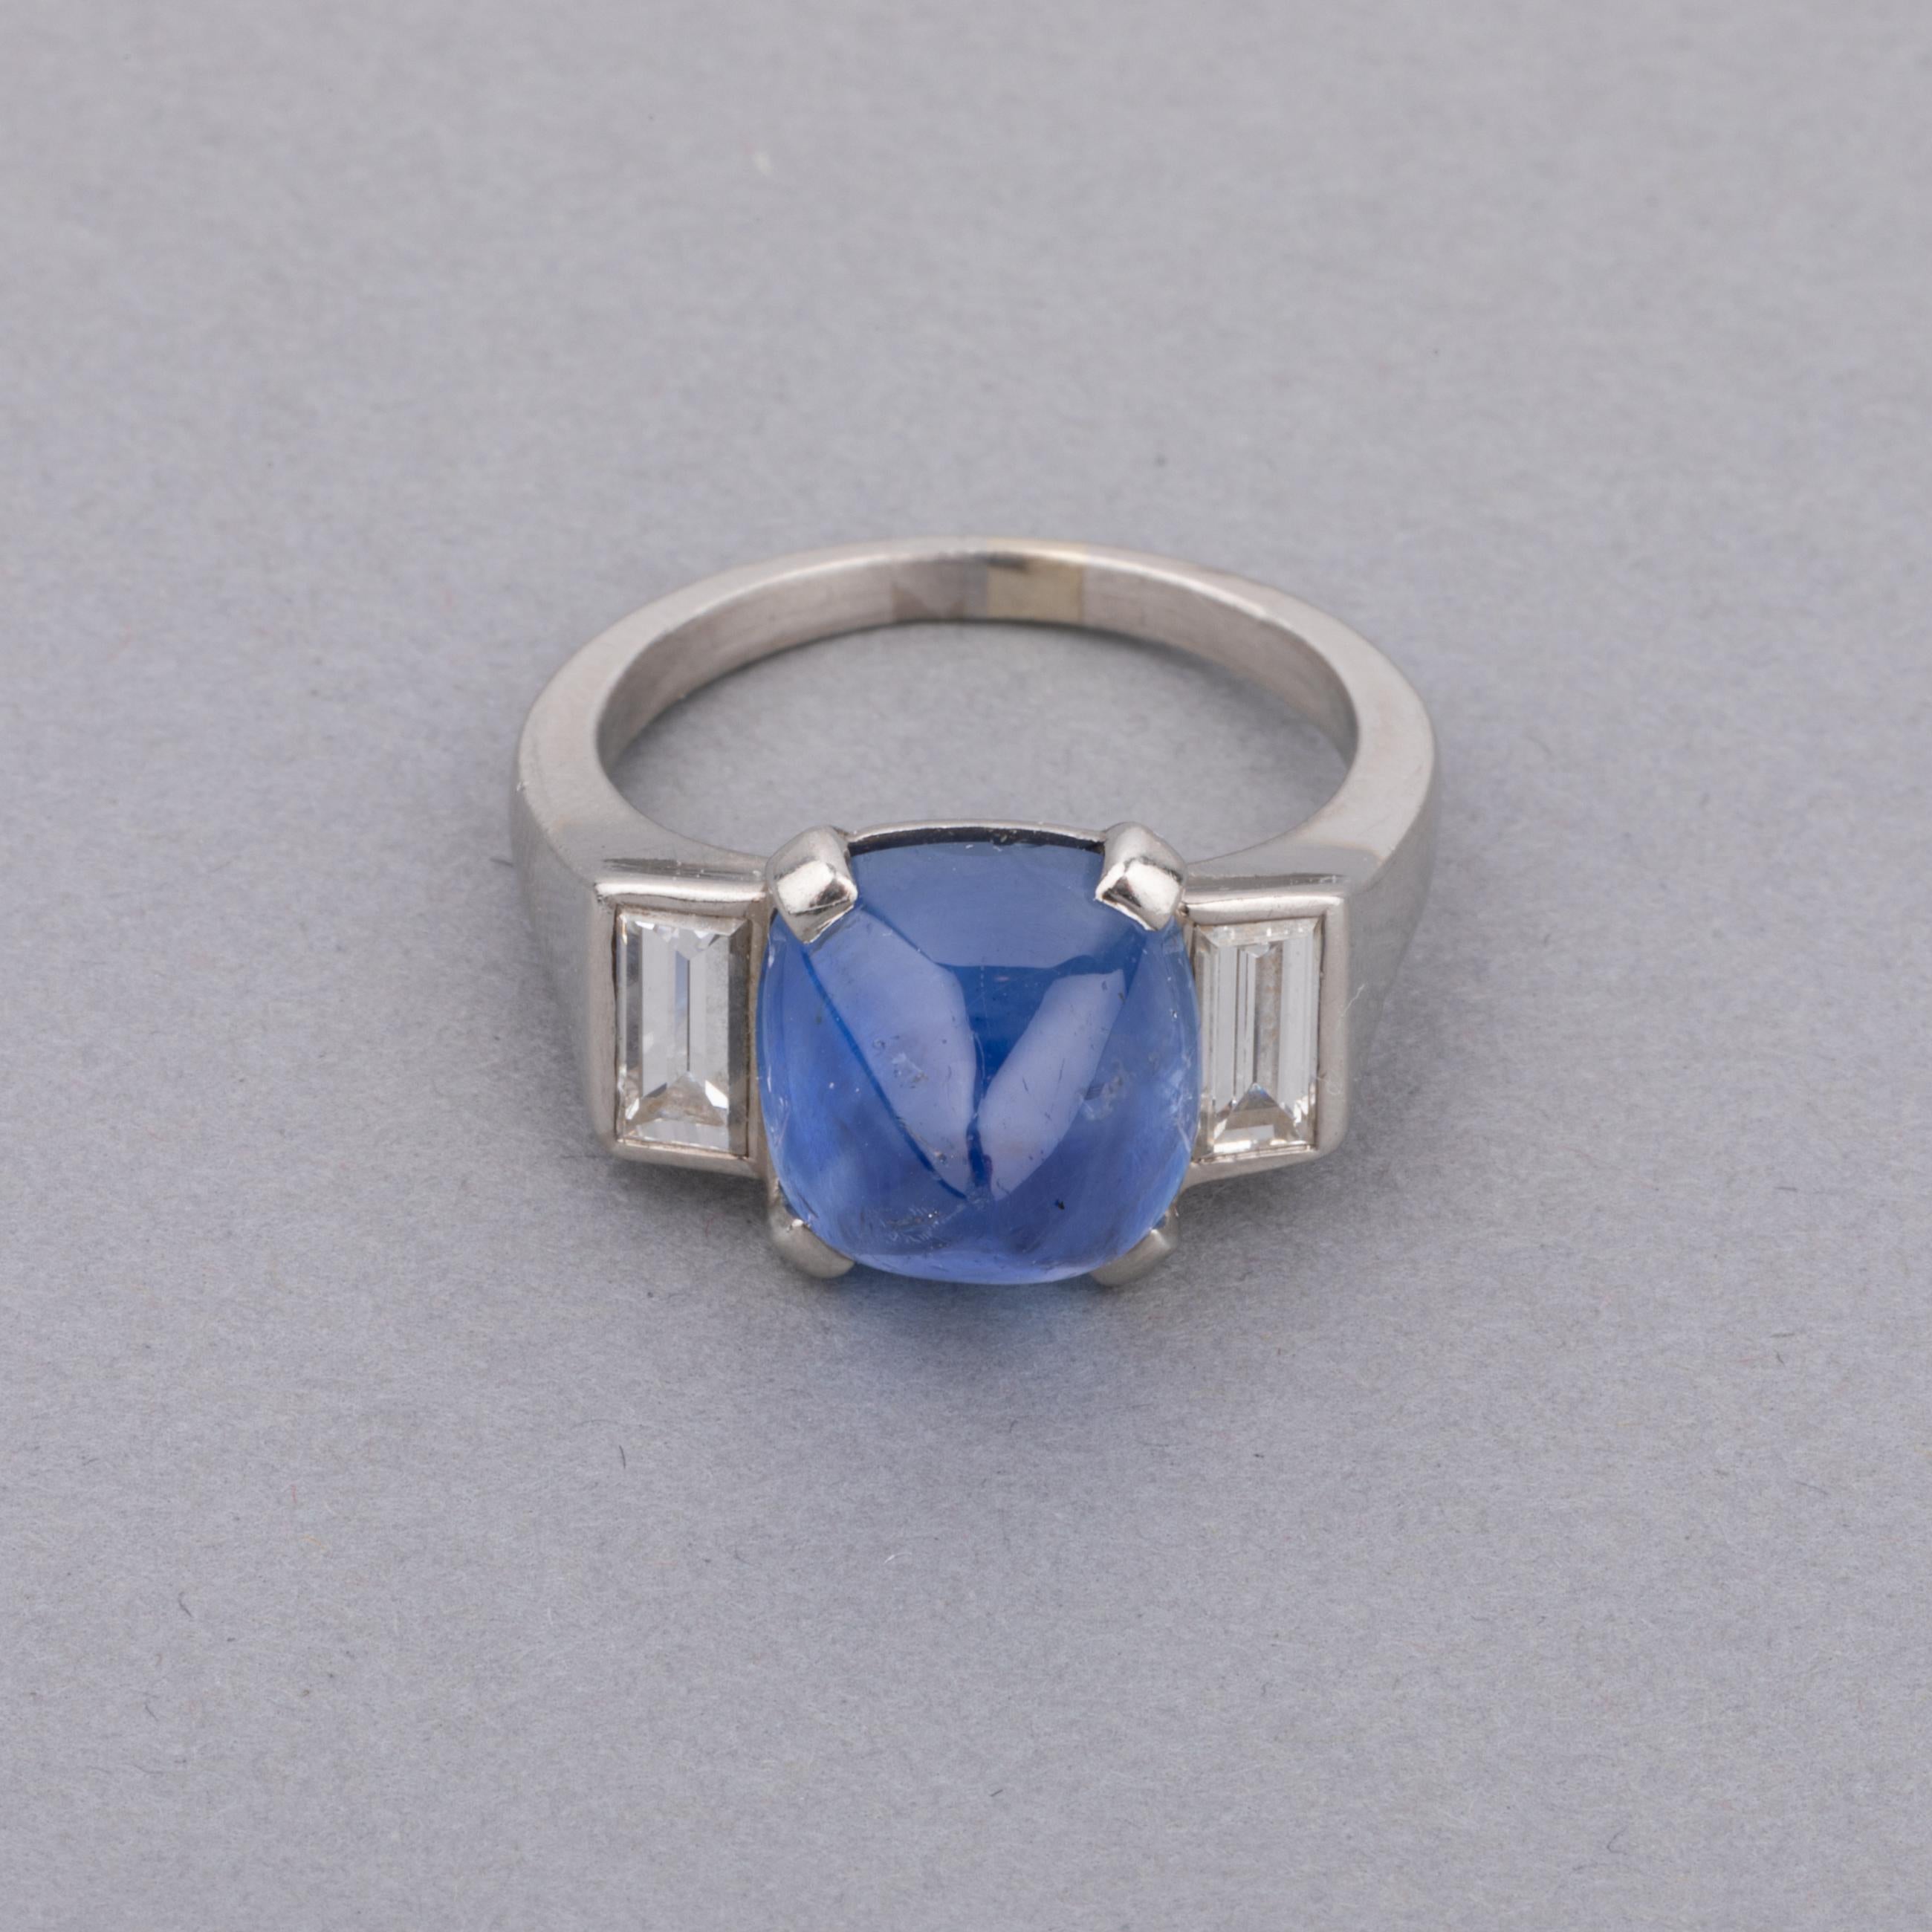 One very lovely ring, made in France circa 1930 by Mauboussin.
Made in platinum and set with an approximately 5 carats sugar Leaf Sapphire. Two baguettes diamonds and the side. The sapphire has good clarity and sweet blue color.
Ring size: 52 or 6